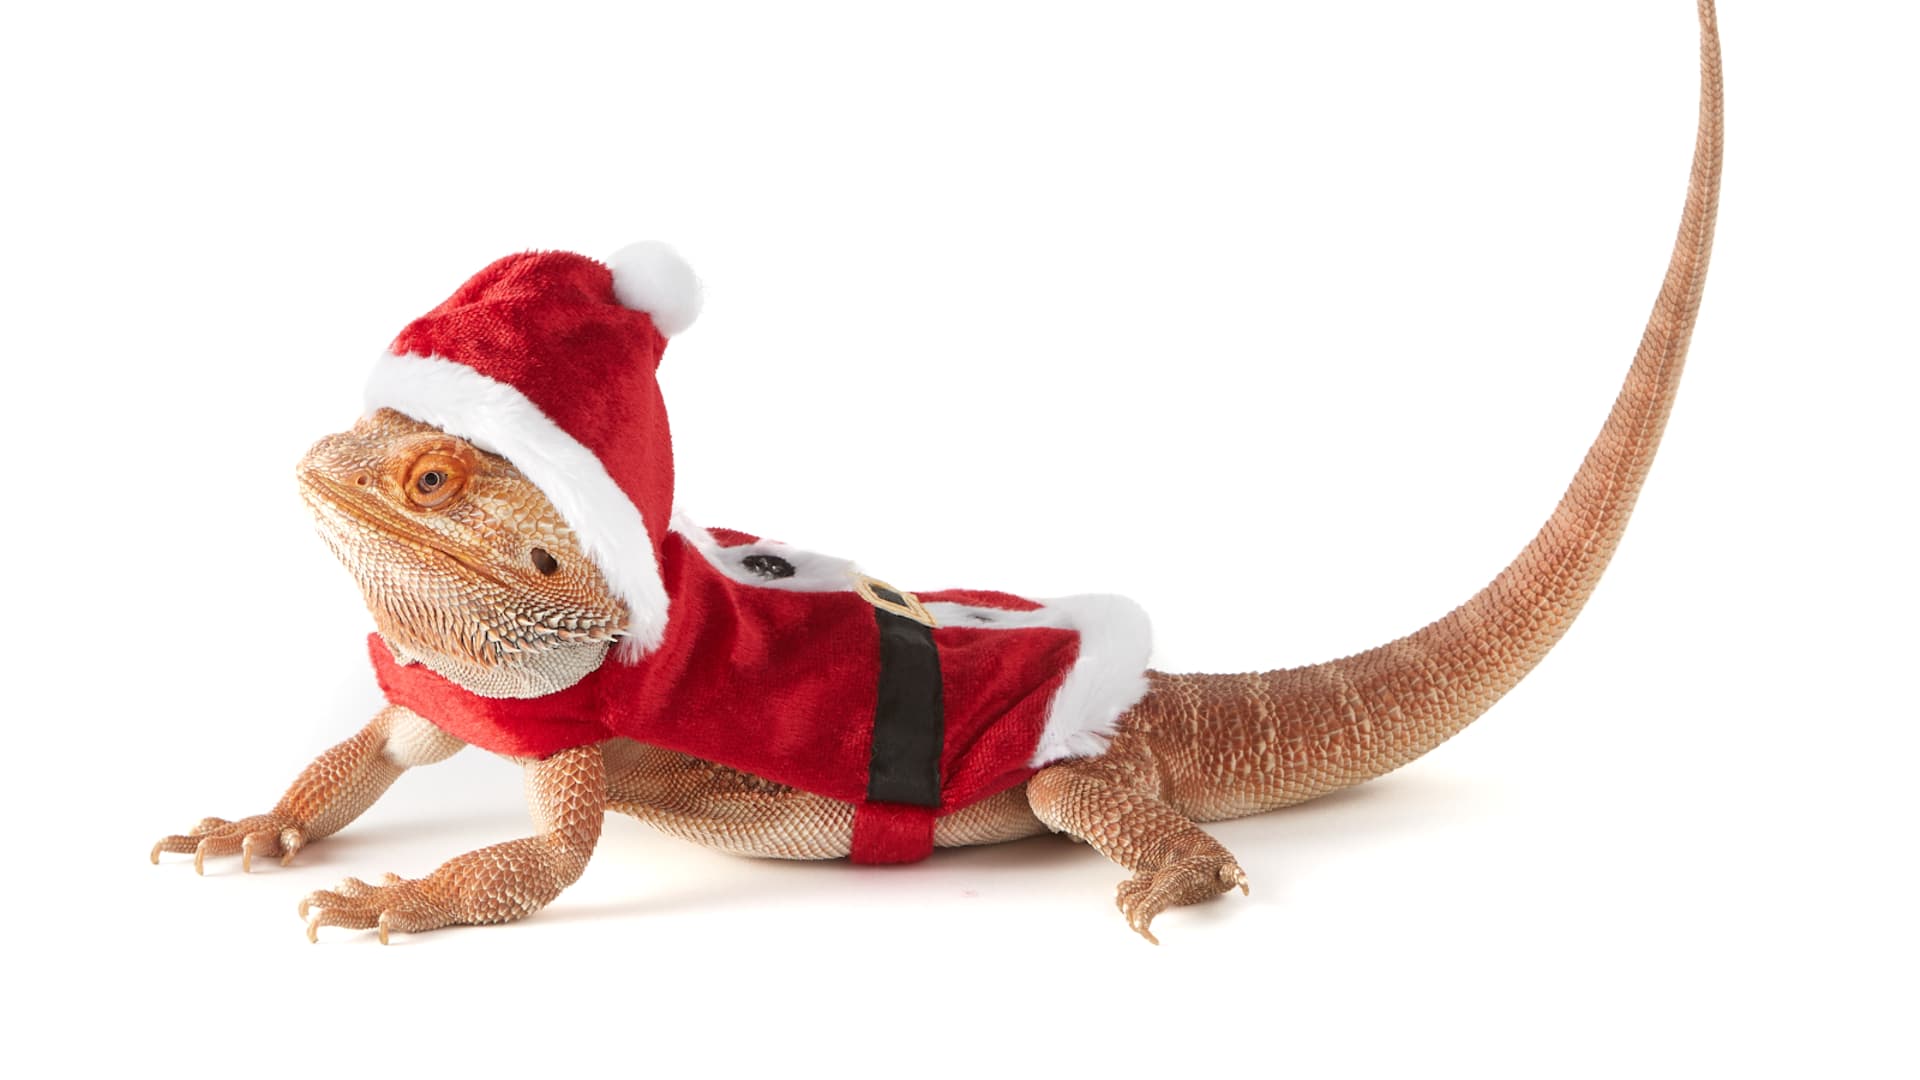 PetSmart has a wide range of seasonal pet gifts and costumes, including some for bearded dragons.